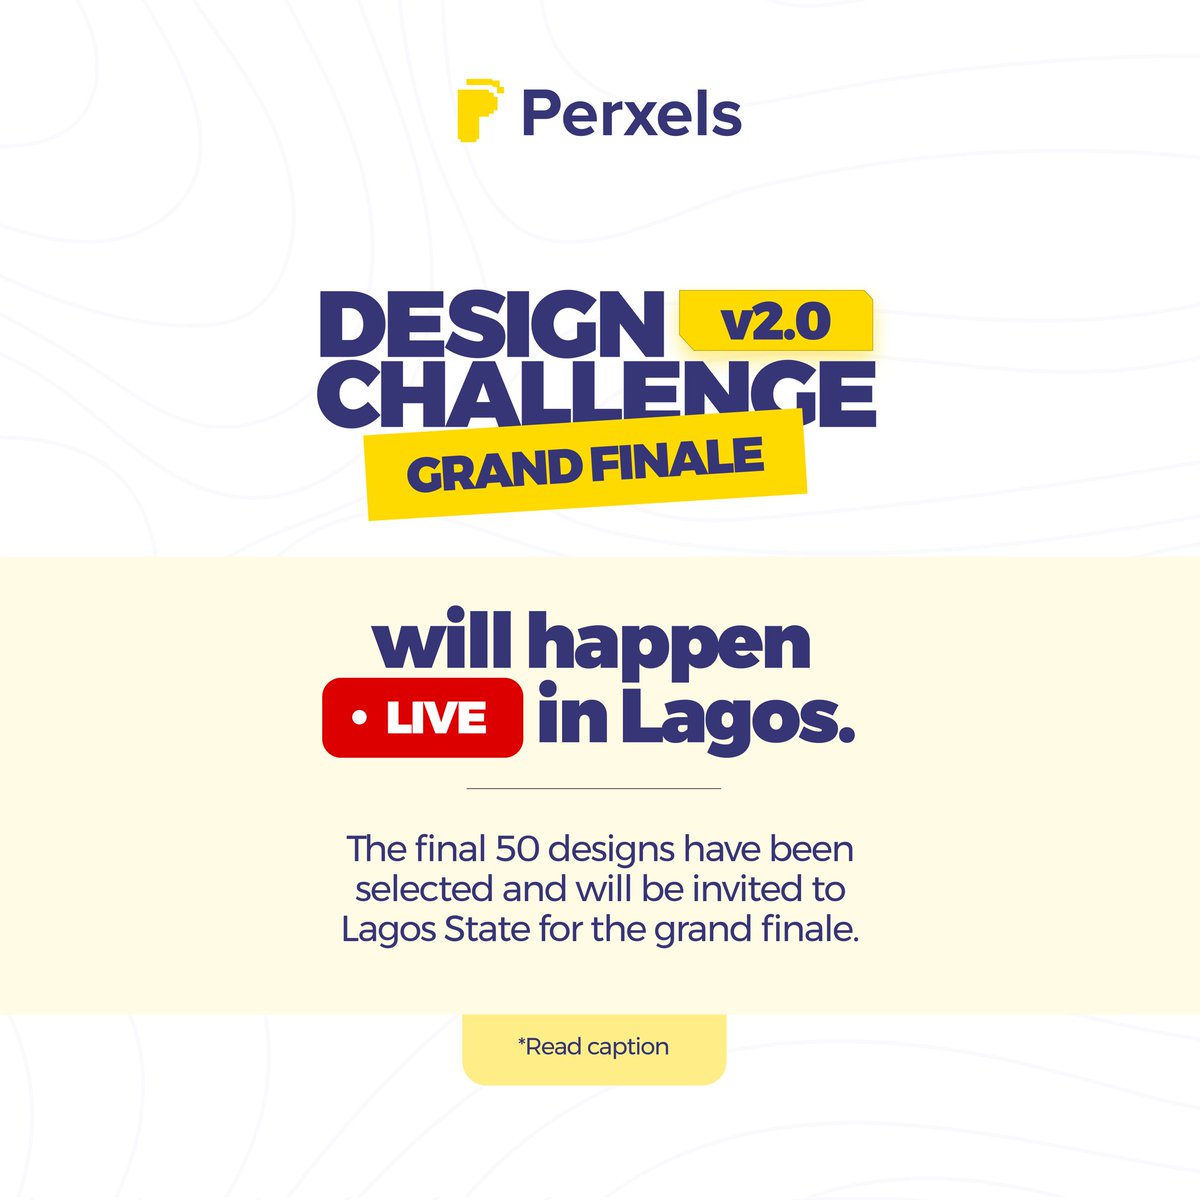 We are thrilled to announce that we are going to be holding the Grand Finale of the just concluded Design Challenge live in Lagos State! This event will be streamed live for those who will not be present physically at the event.